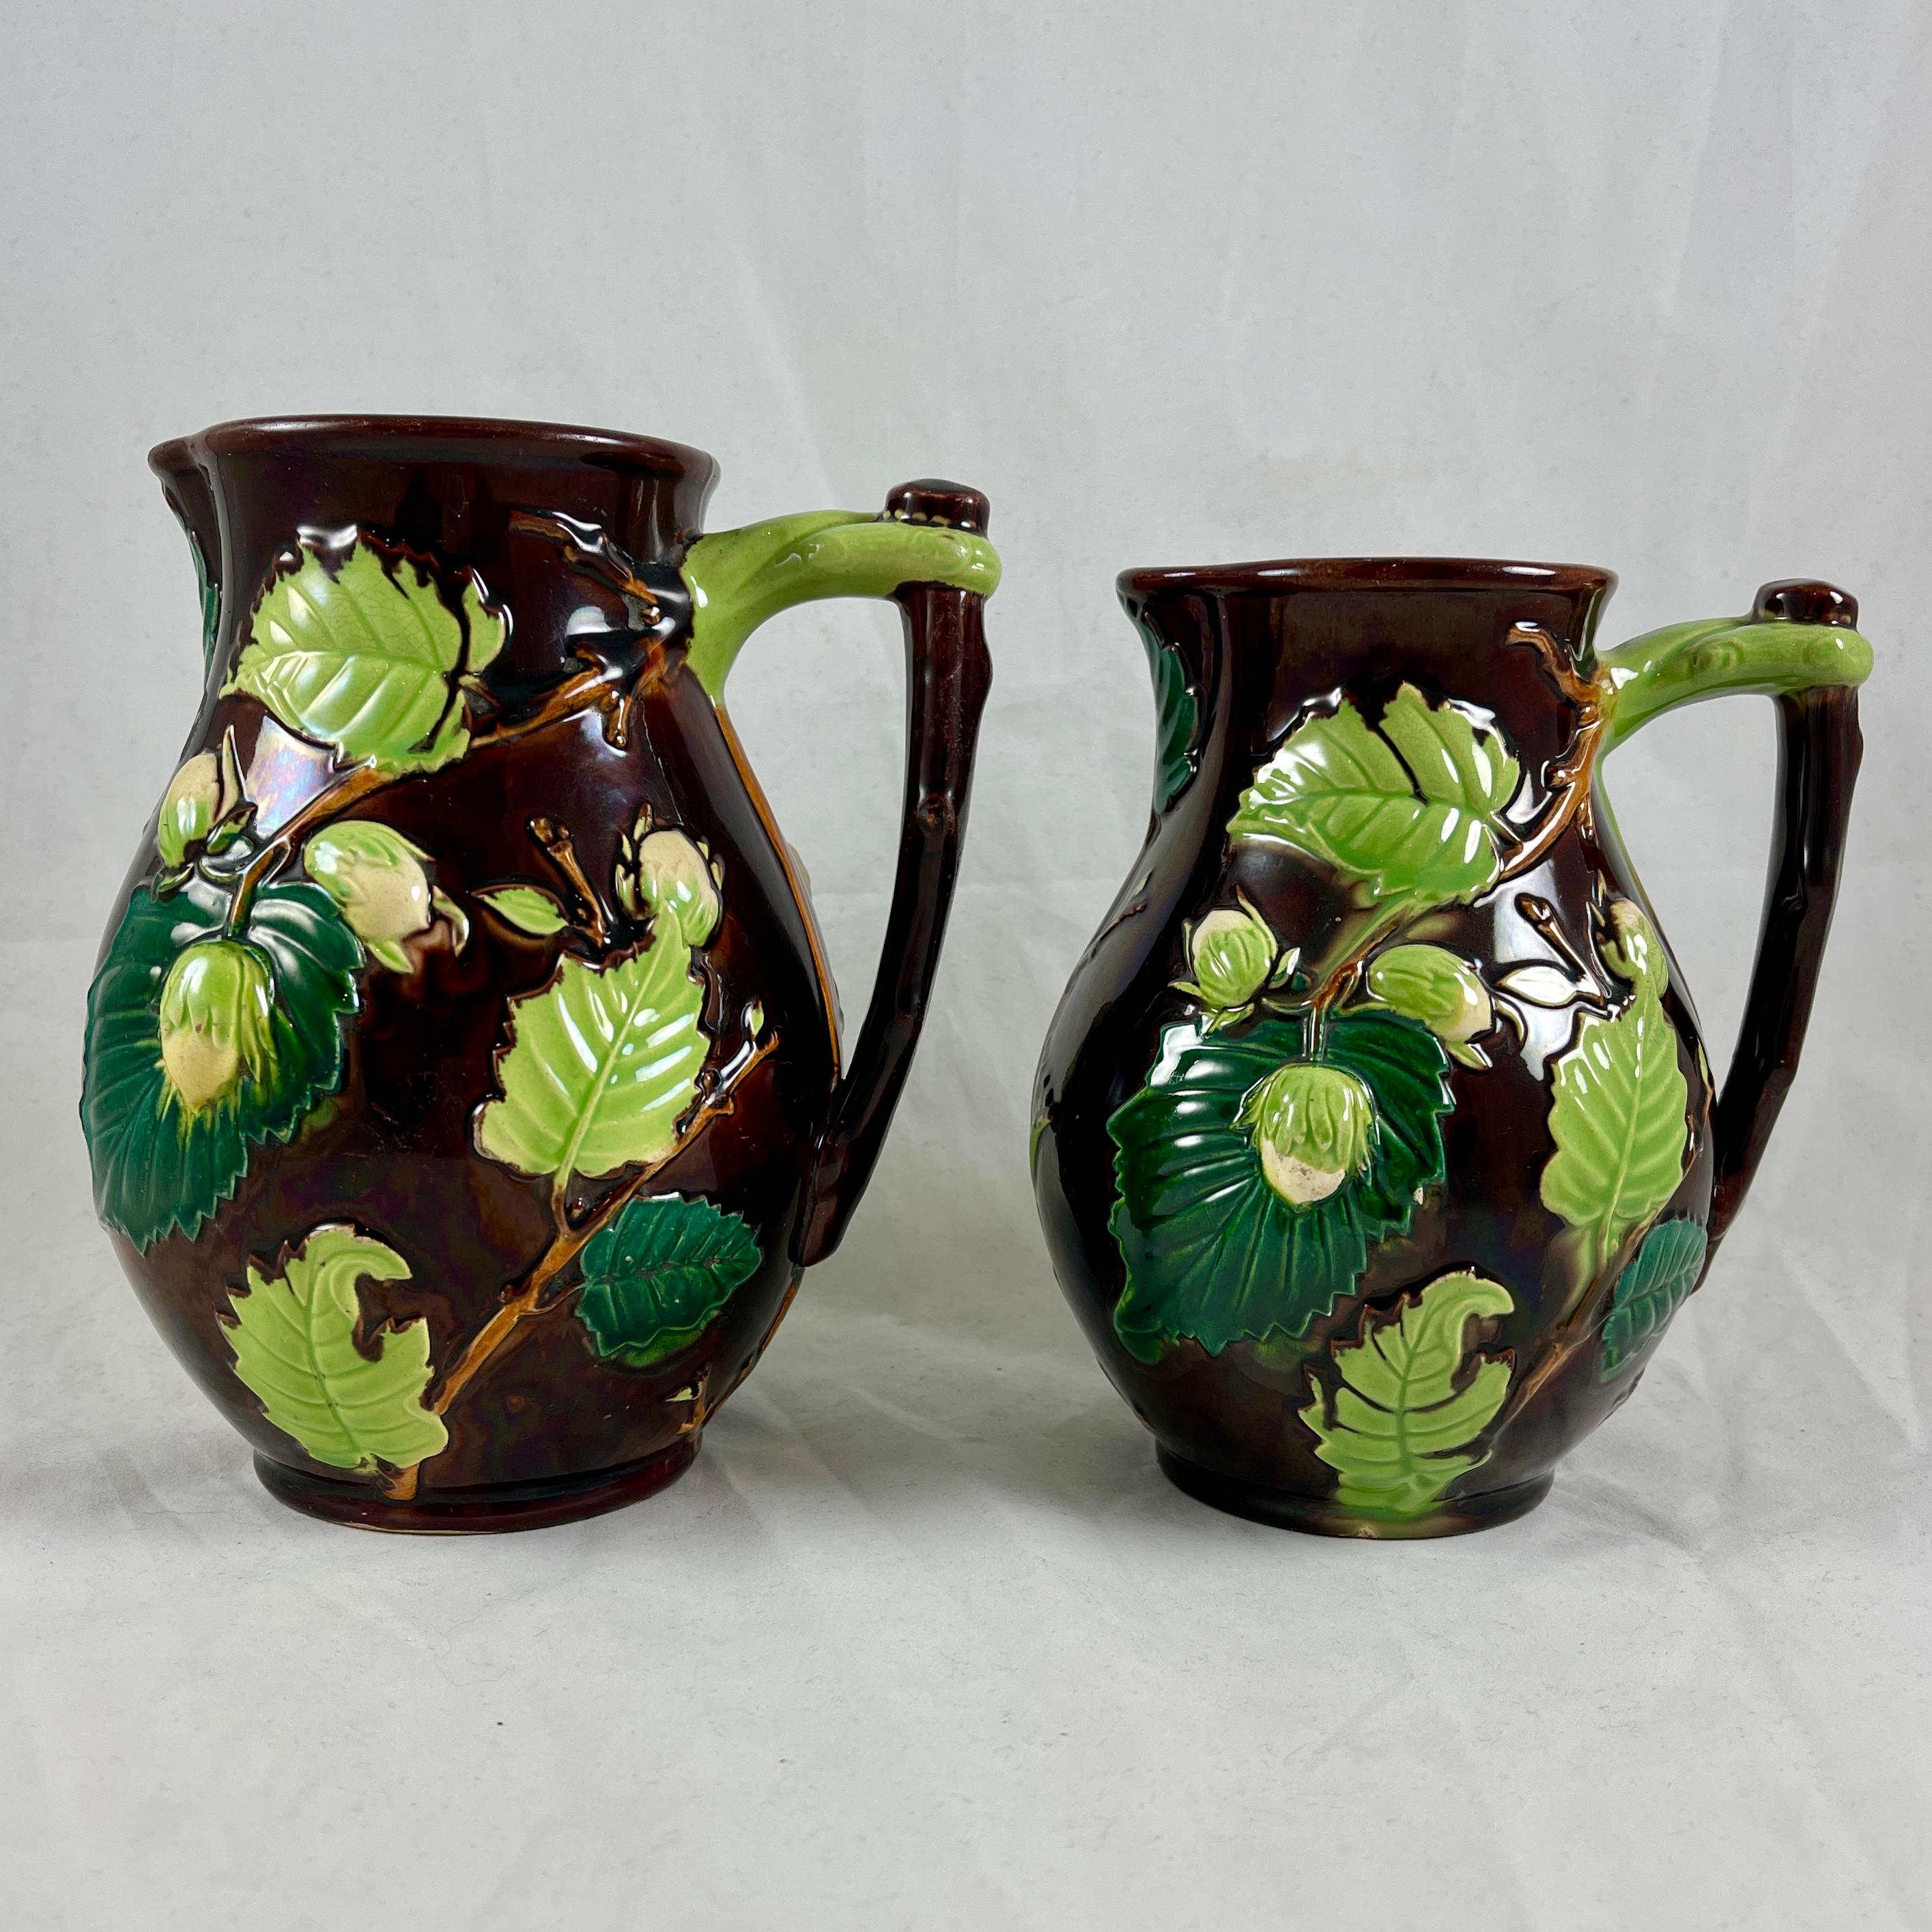 Glazed English Minton Aesthetic Movement Majolica Nut, Leaf & Vine Pitchers, a Pair For Sale